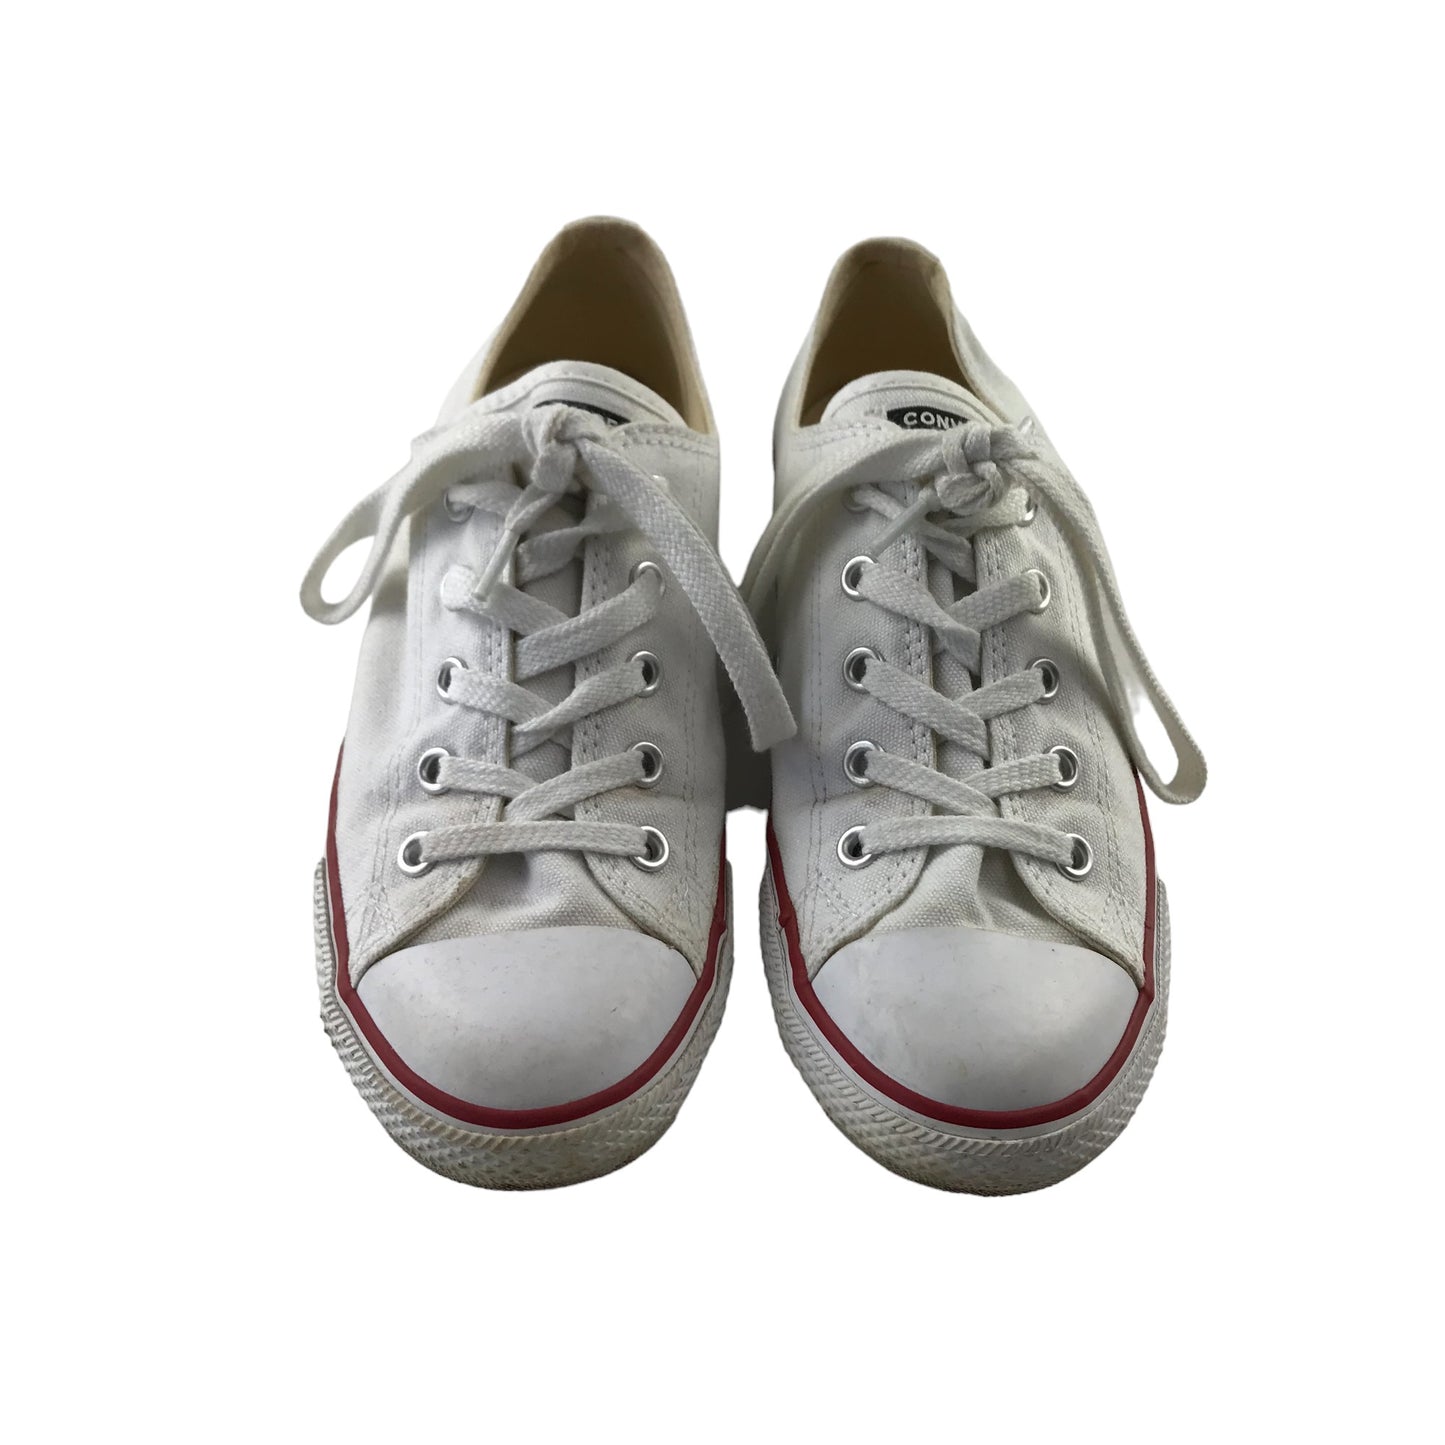 Converse Trainers Shoe Size 5 White Slim All Star Chuck Taylor Low Top